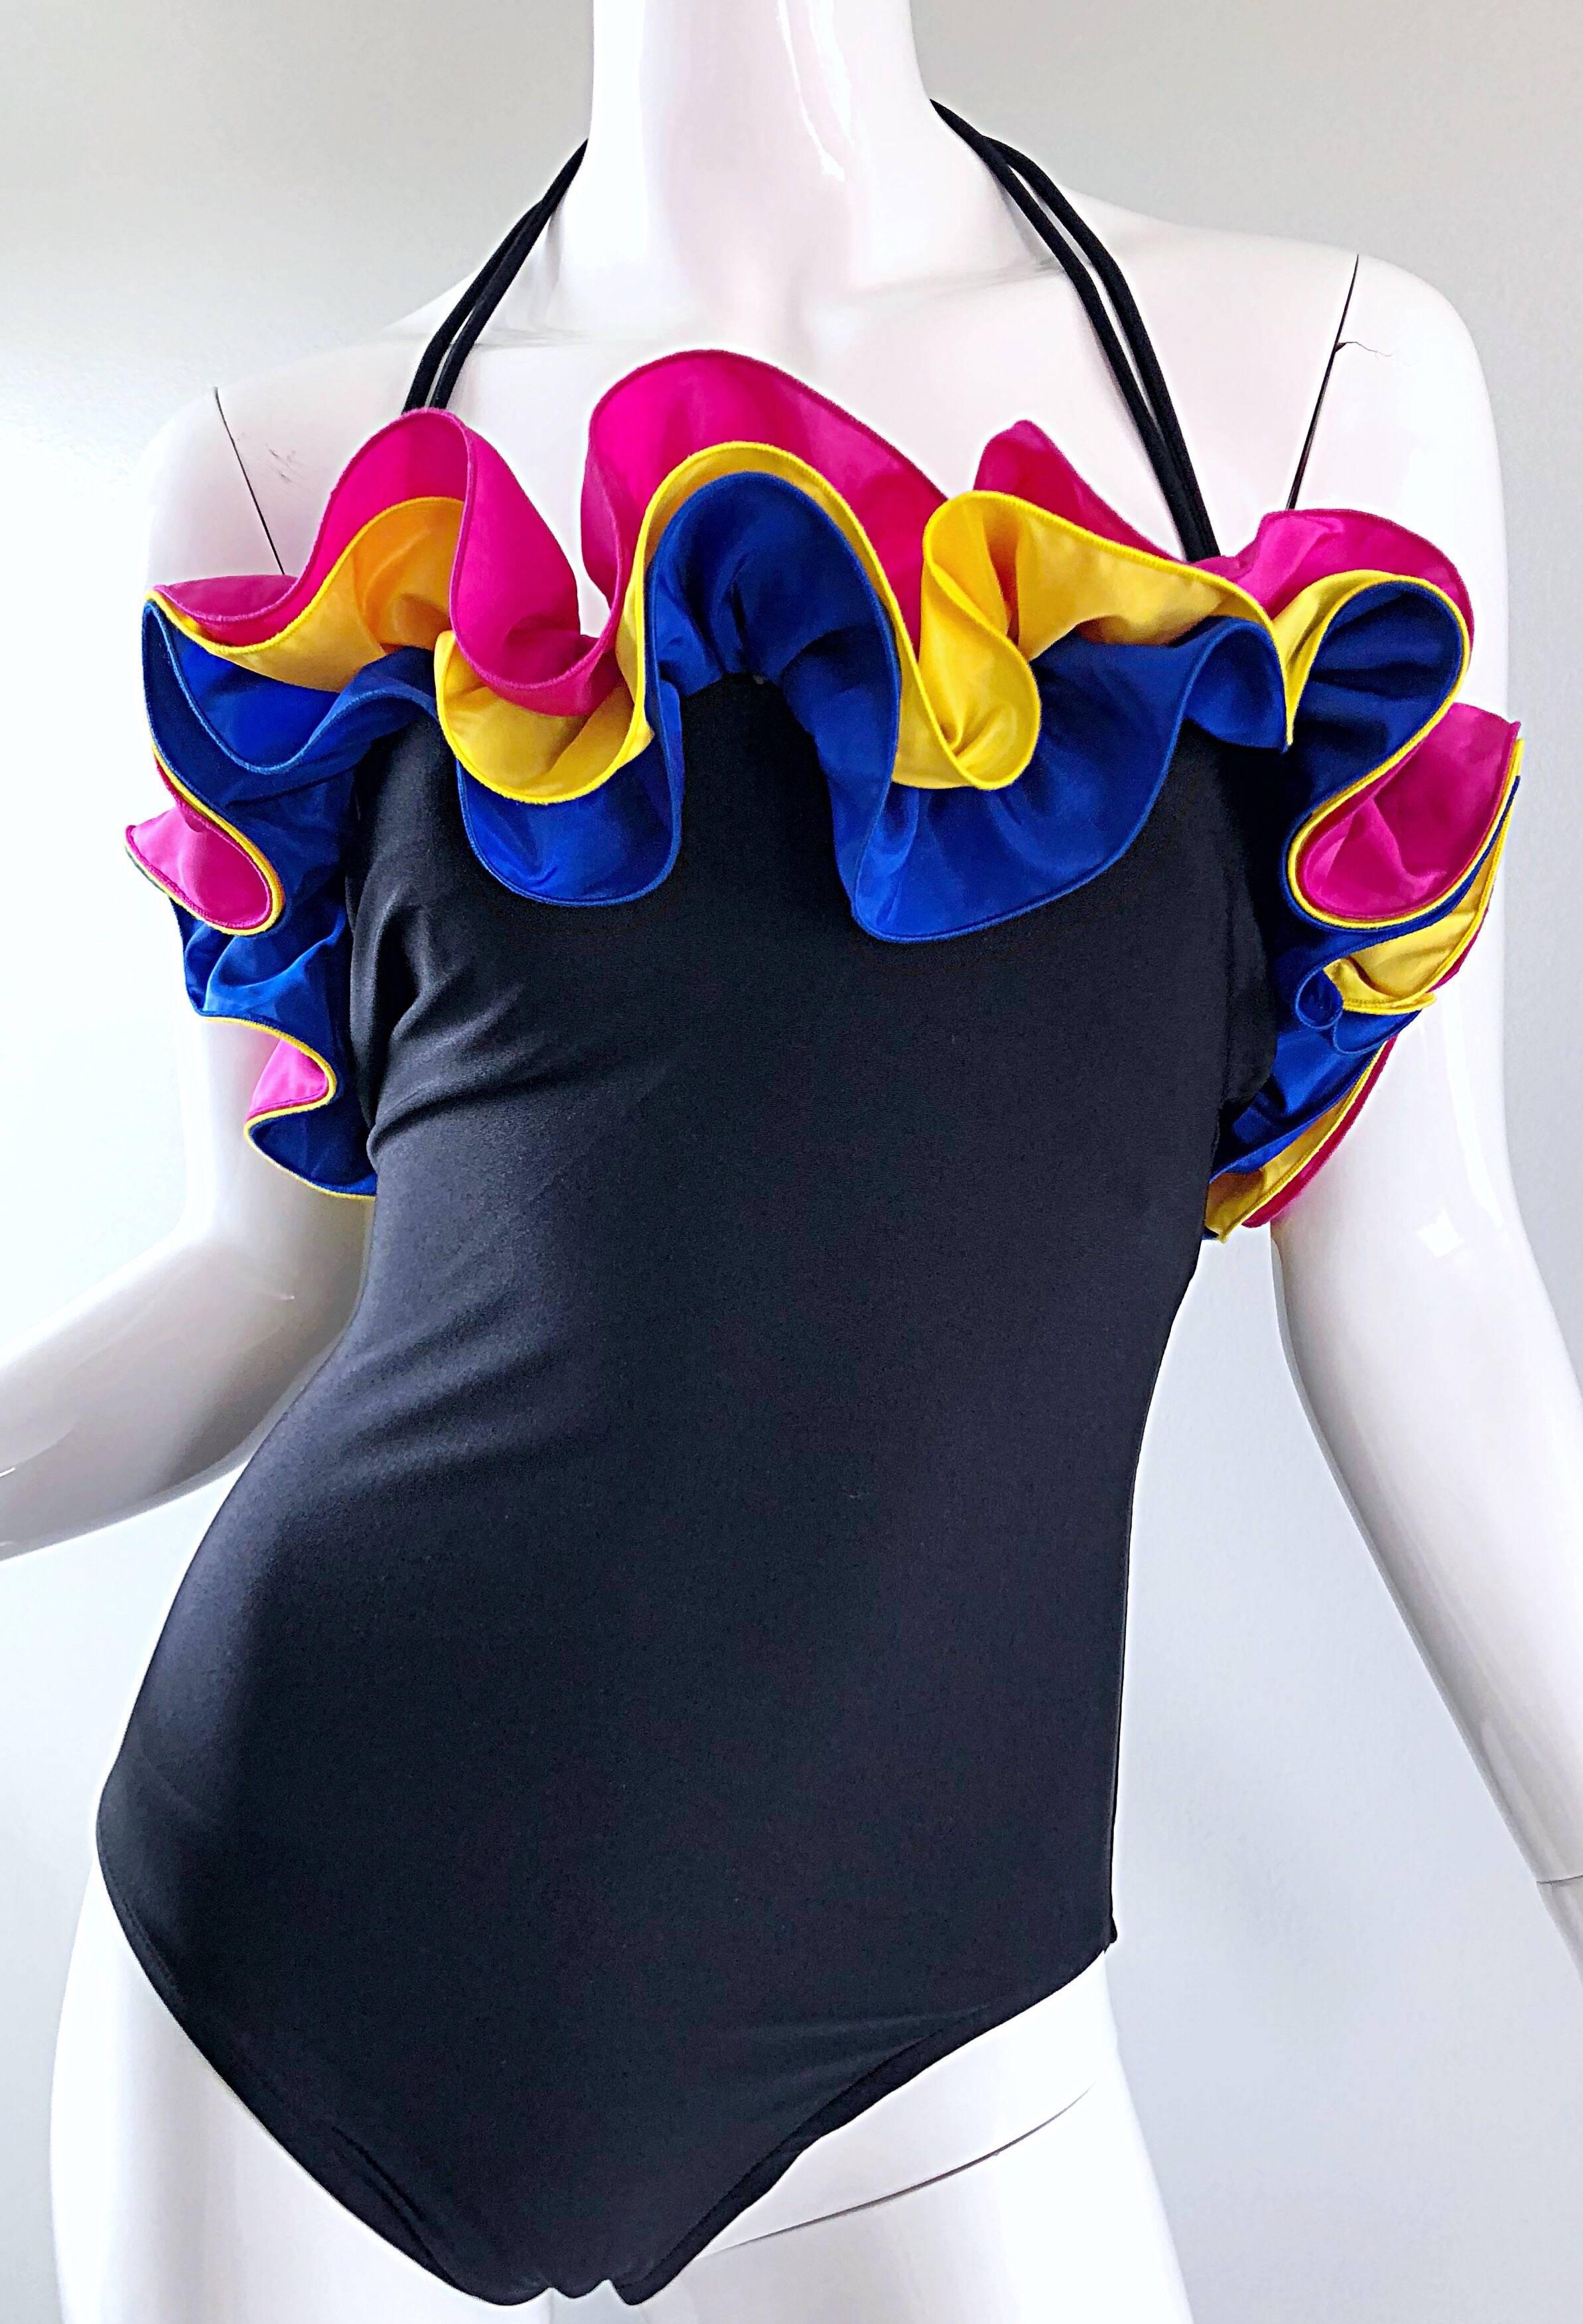 Amazing new with tags vintage BILL BLASS flamenco style one piece swimsuit or bodysuit, with detachable halter strap! Features three layers of ruffles around the top. Vibrant colors of blue, yellow and hot pink, with a black body. Comes with